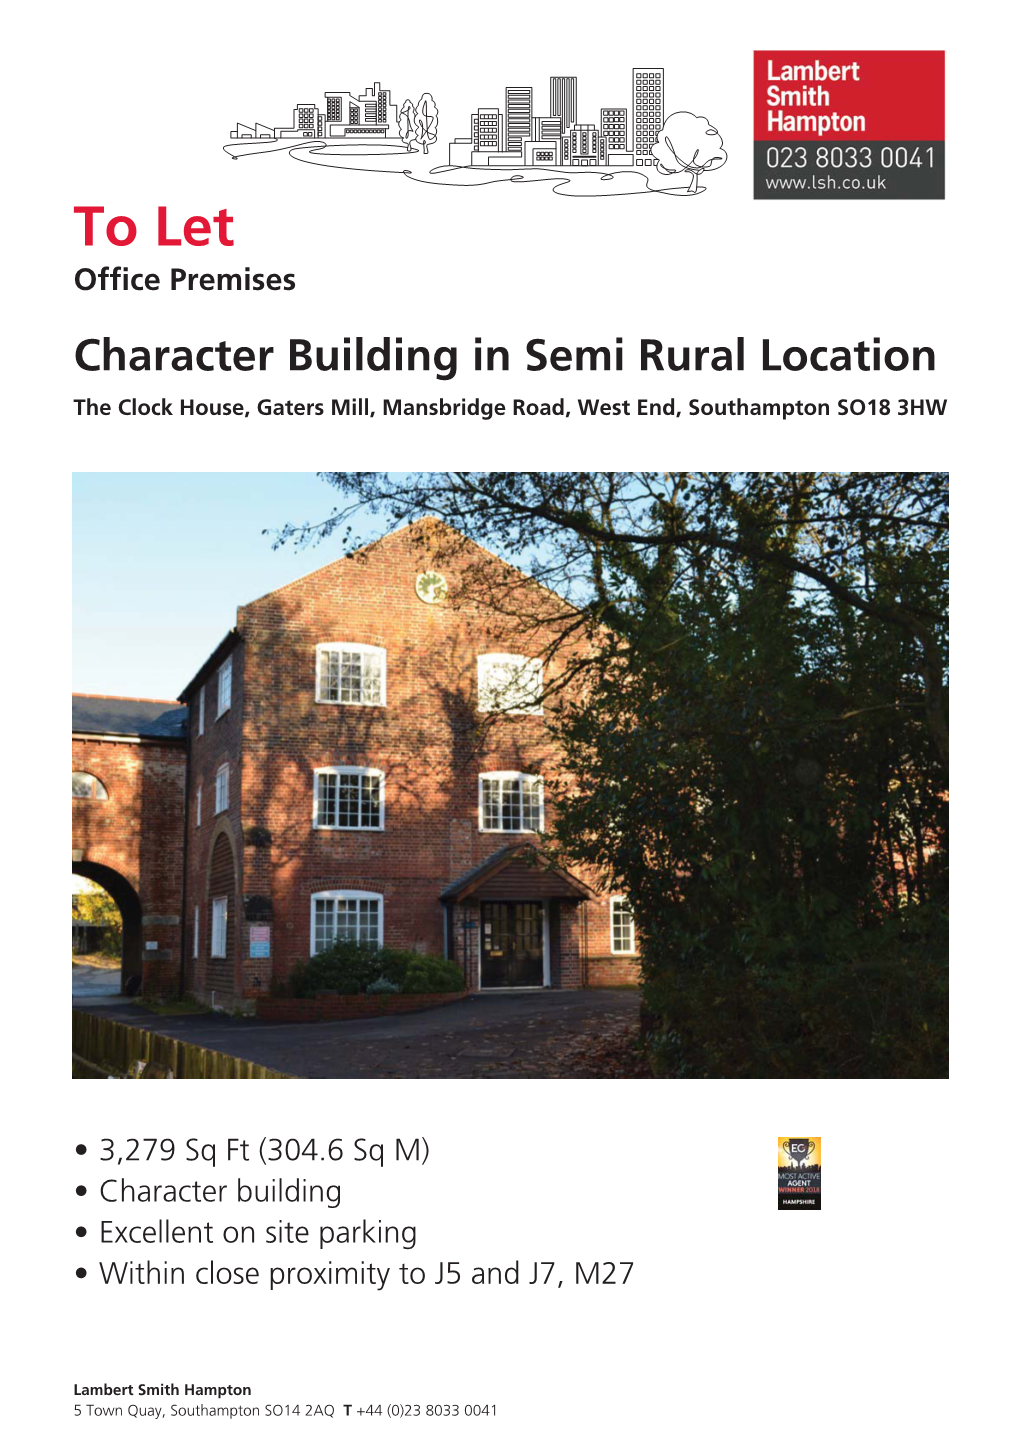 To Let,The Clock House, Gaters Mill, Mansbridge Road, West End, Southampton SO18